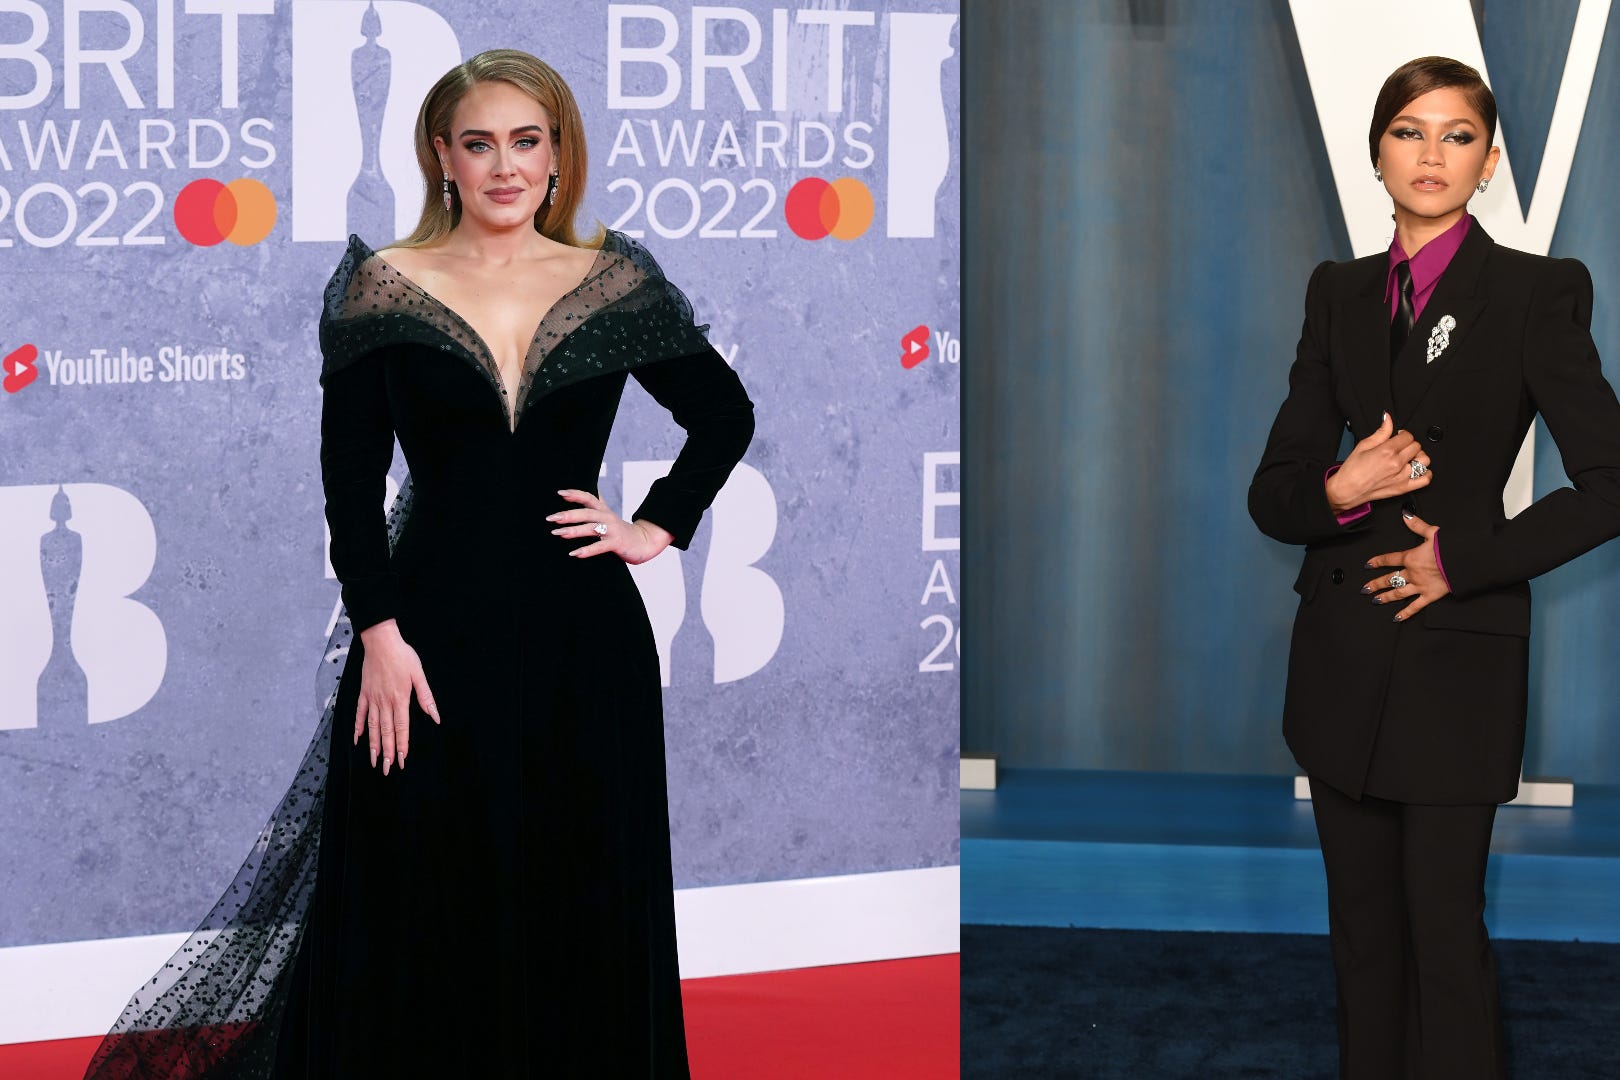 Adele and Zendaya have turned out some serious looks this year (Ian West/Doug Peters/PA)